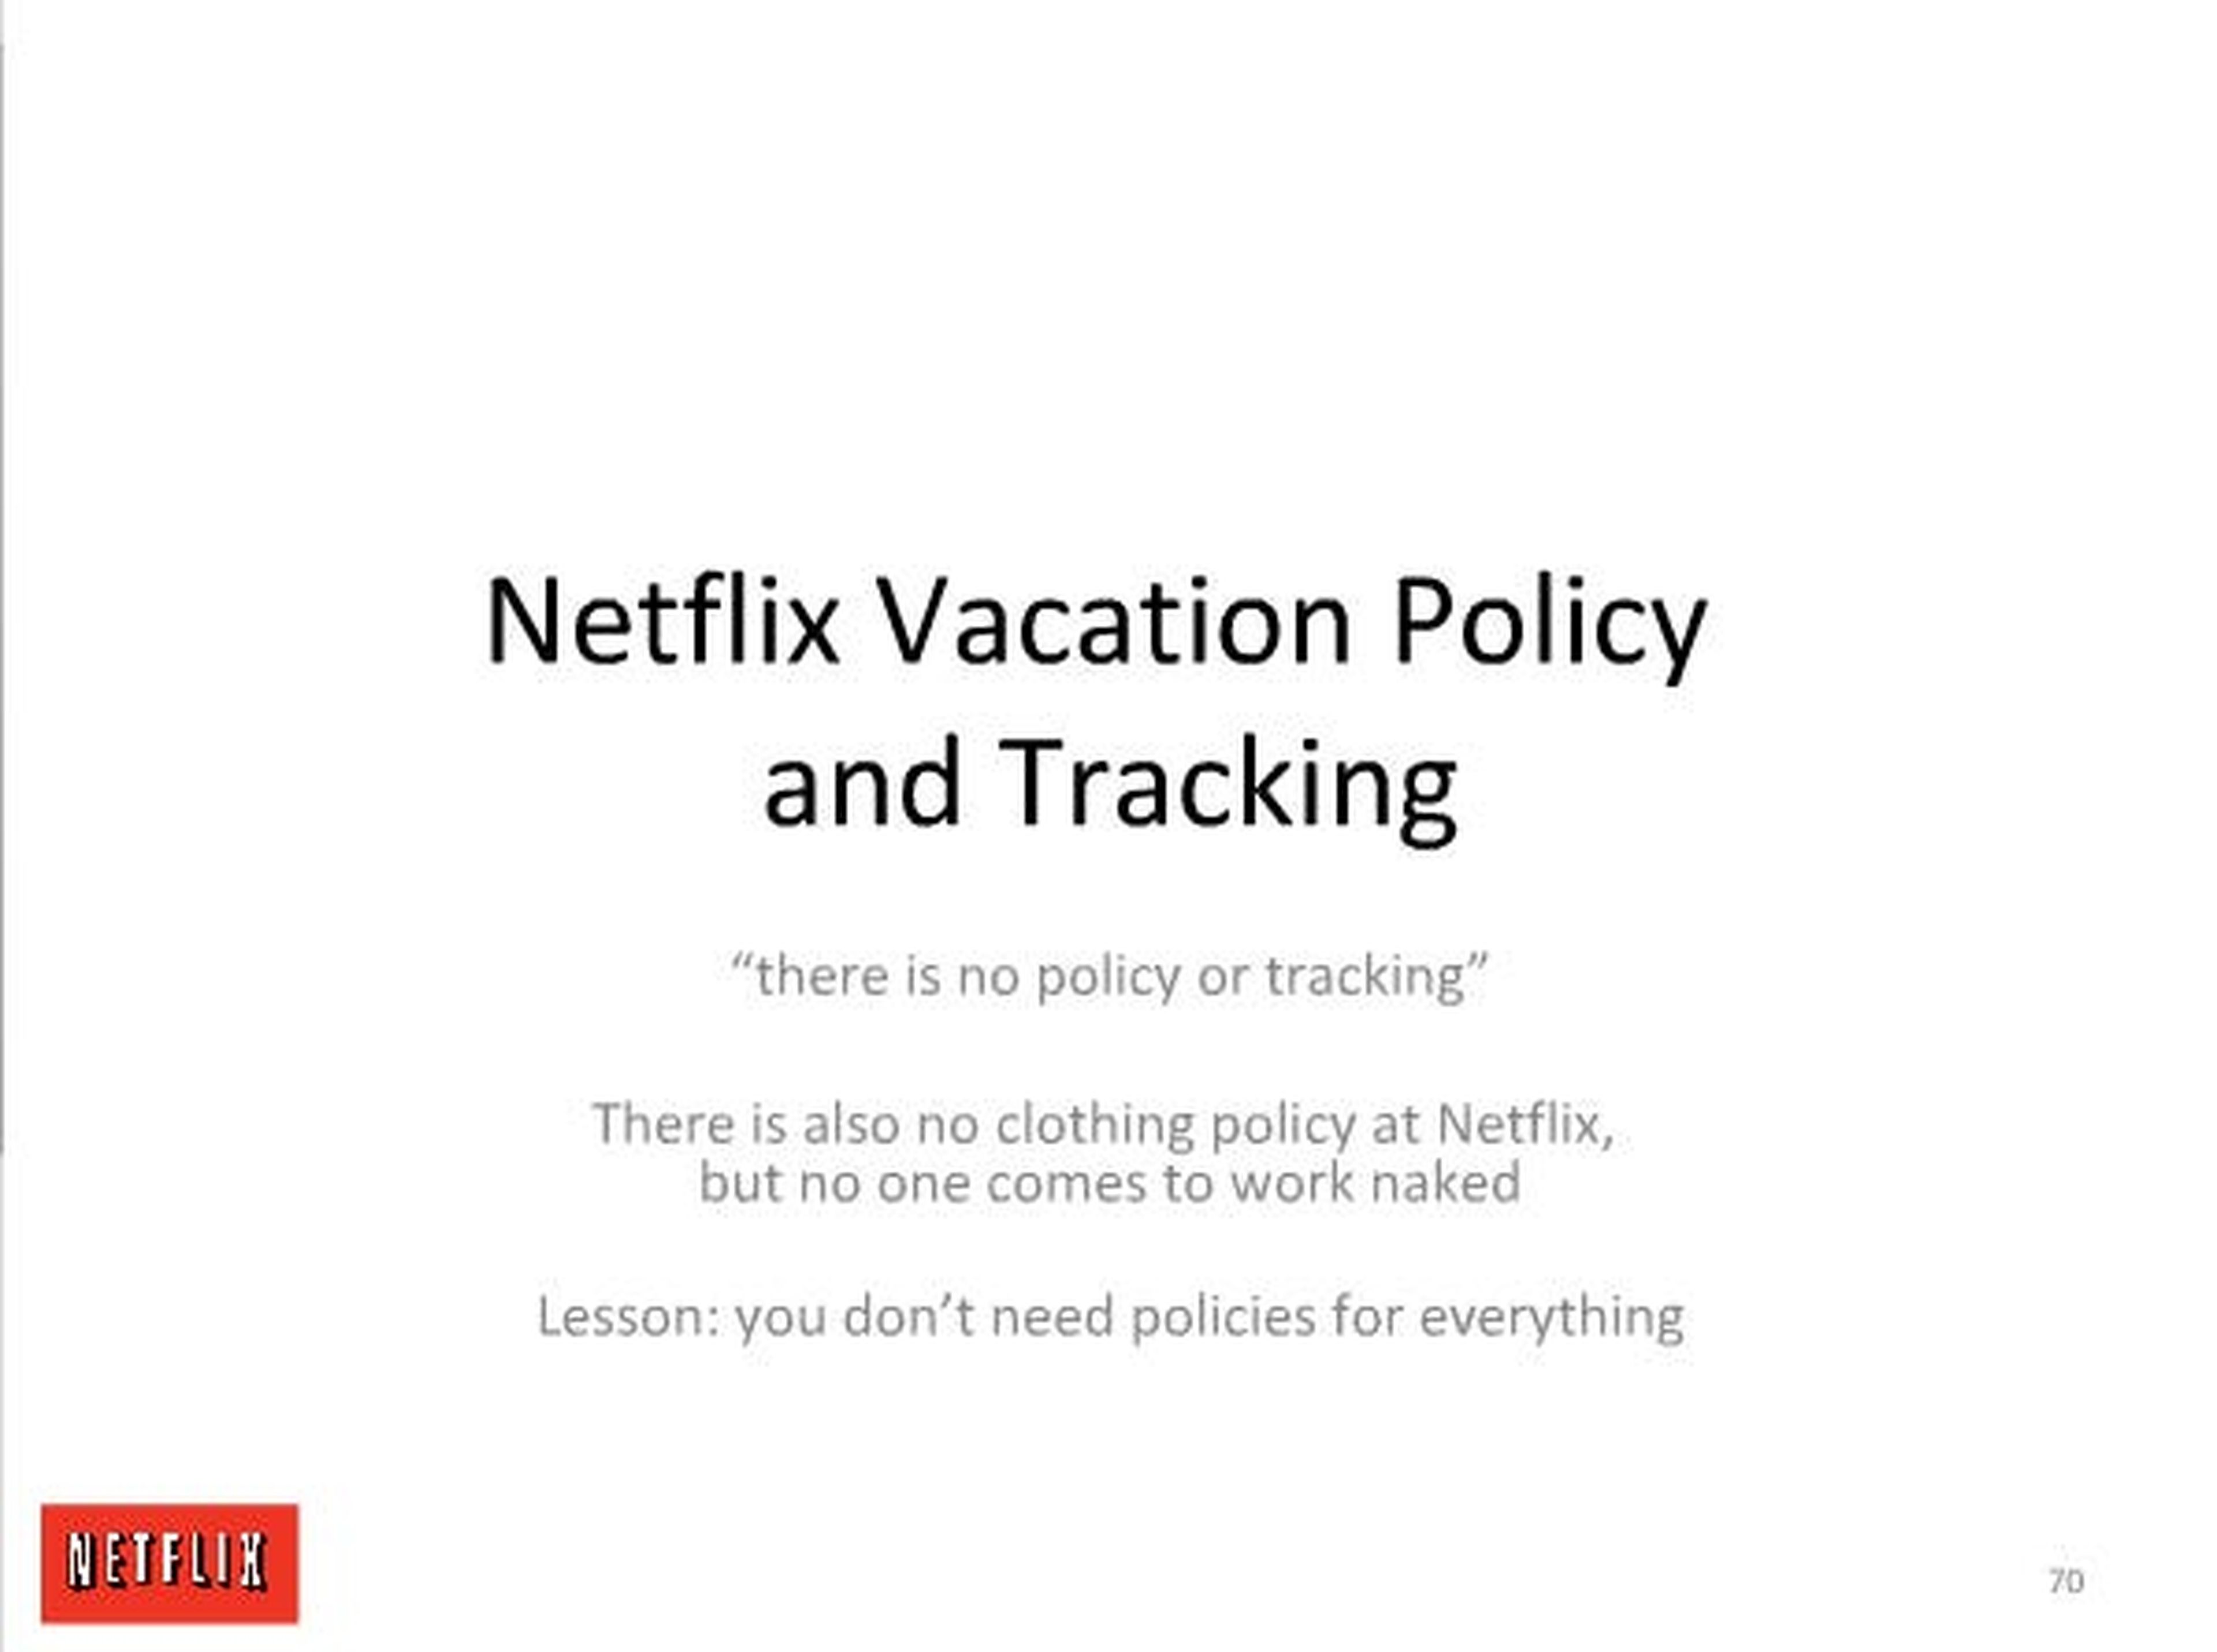 Cultura en Netflix: Vacation Policy and Tracking